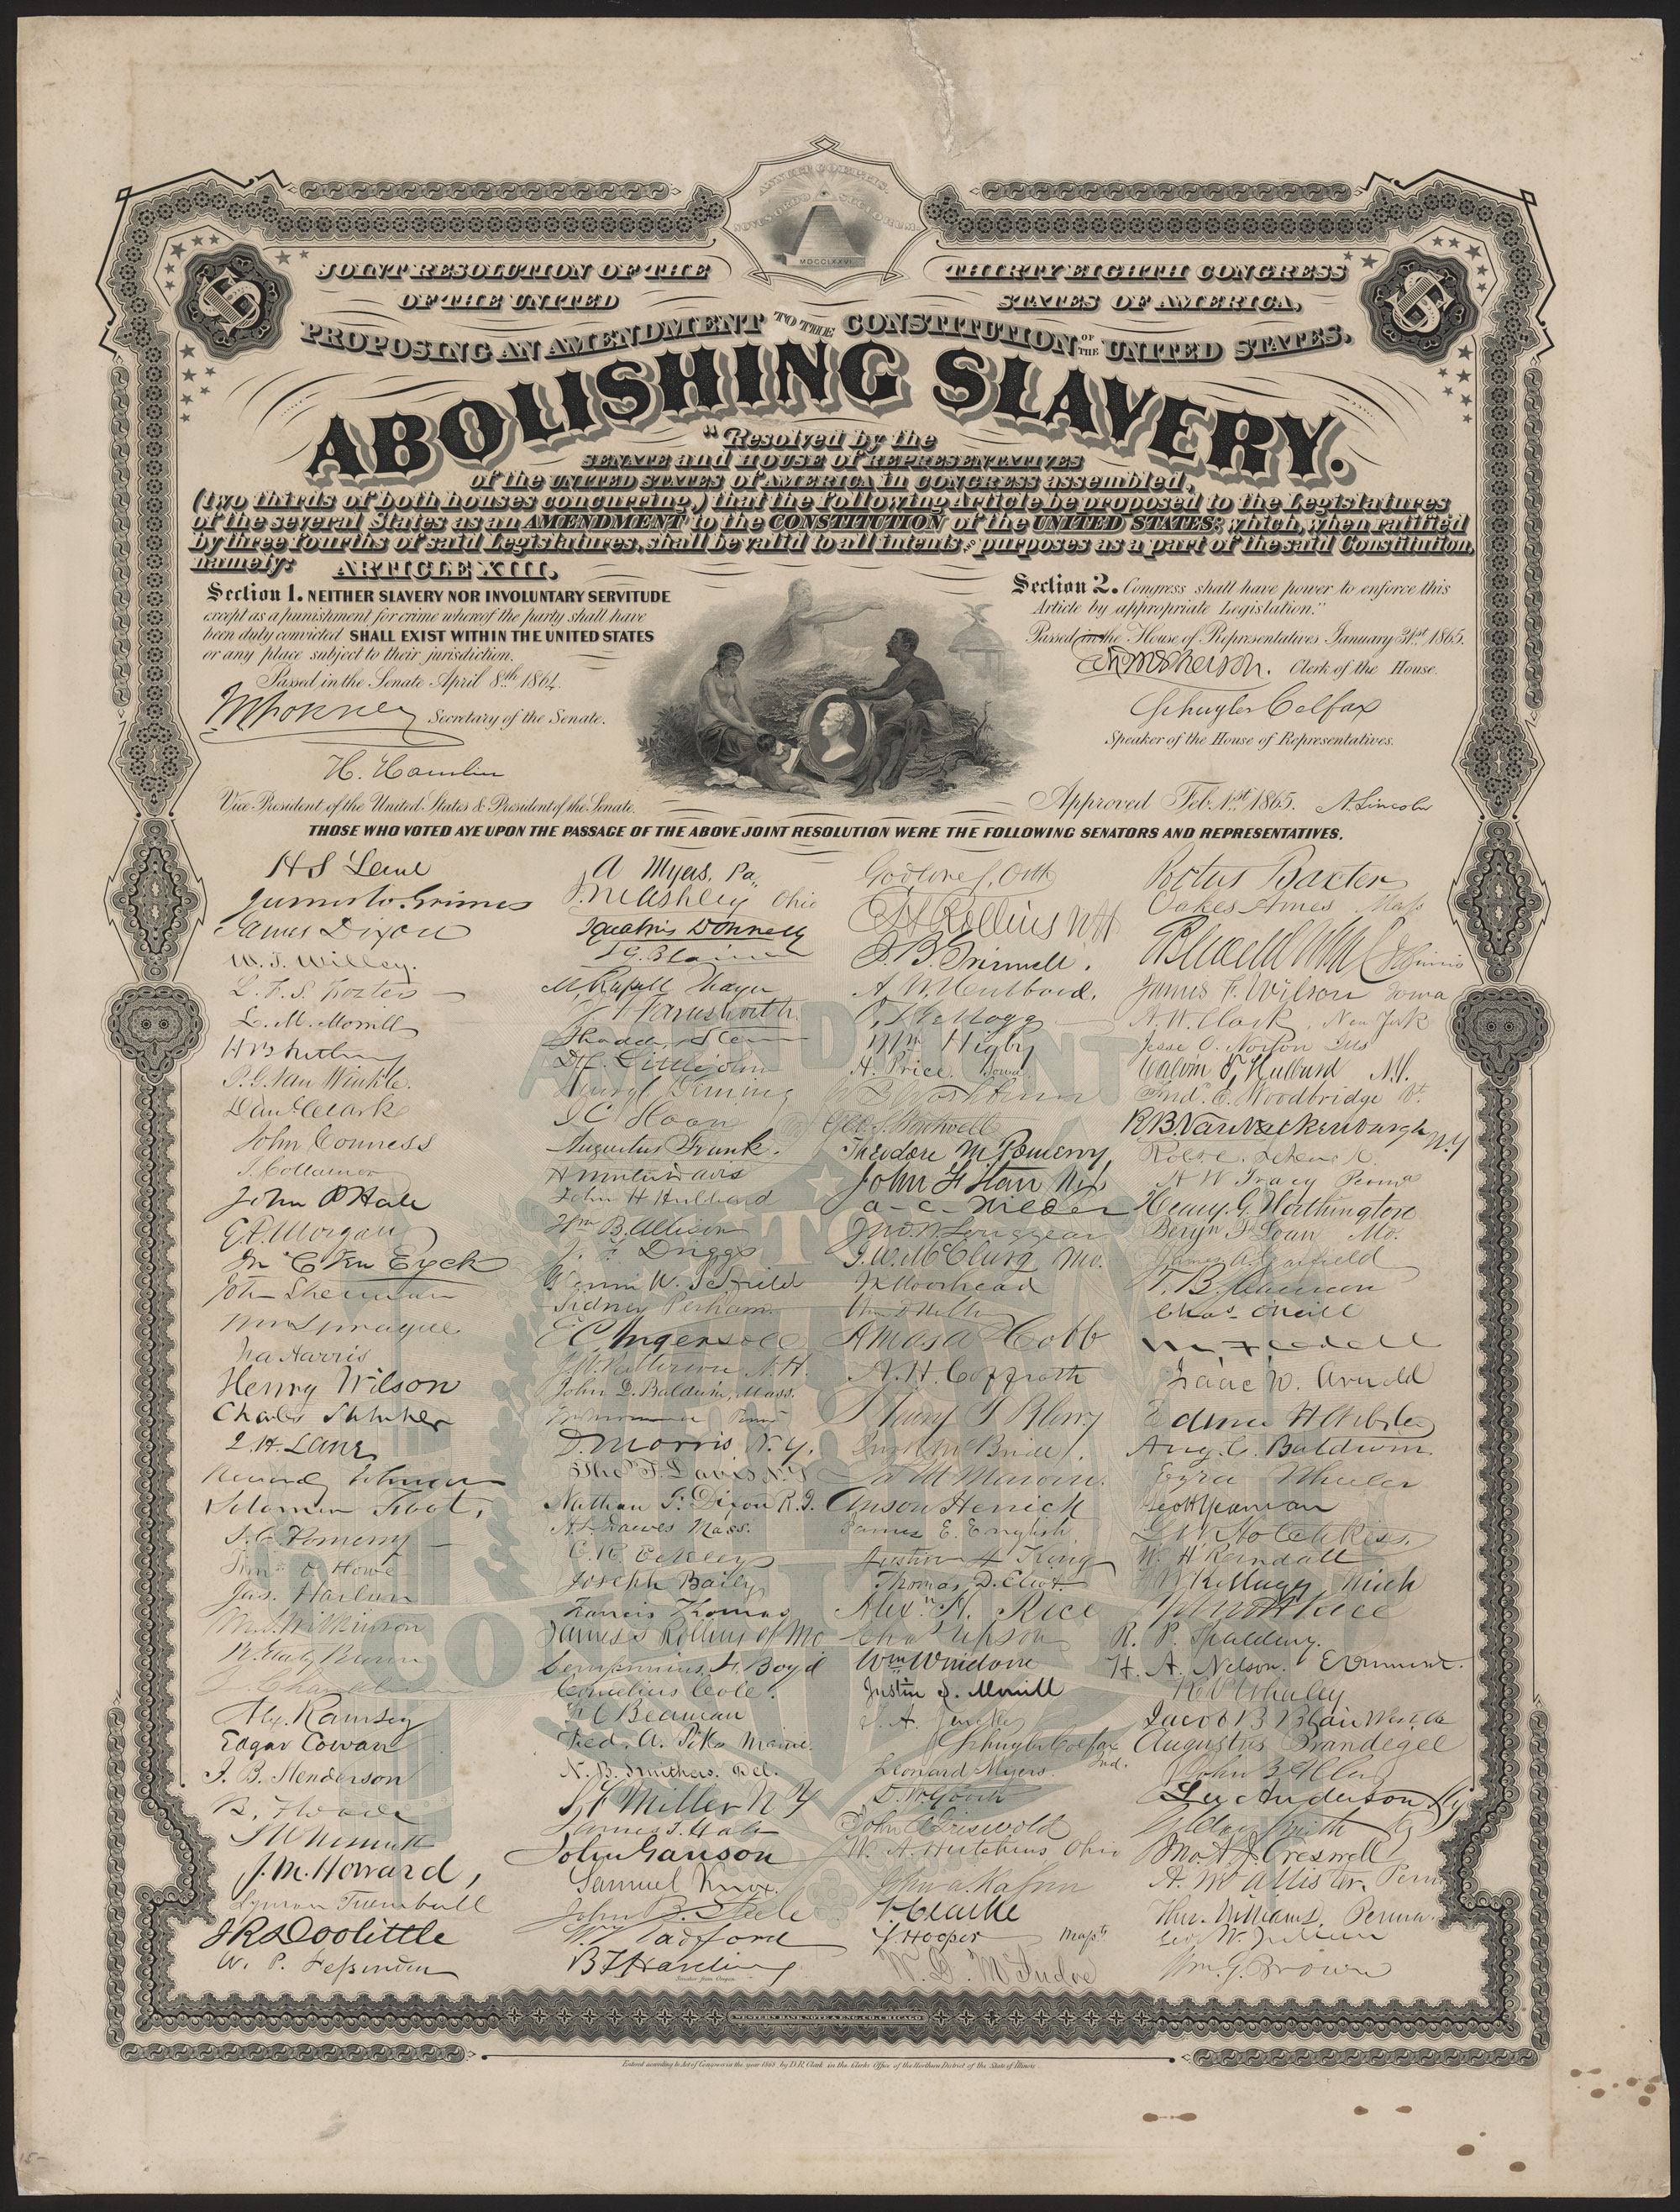 Abolishing Slavery. Joint resolution of the thirty eight Congress of the United States of America, proposing an amendment to the Constitution of the United States, abolishing slavery.